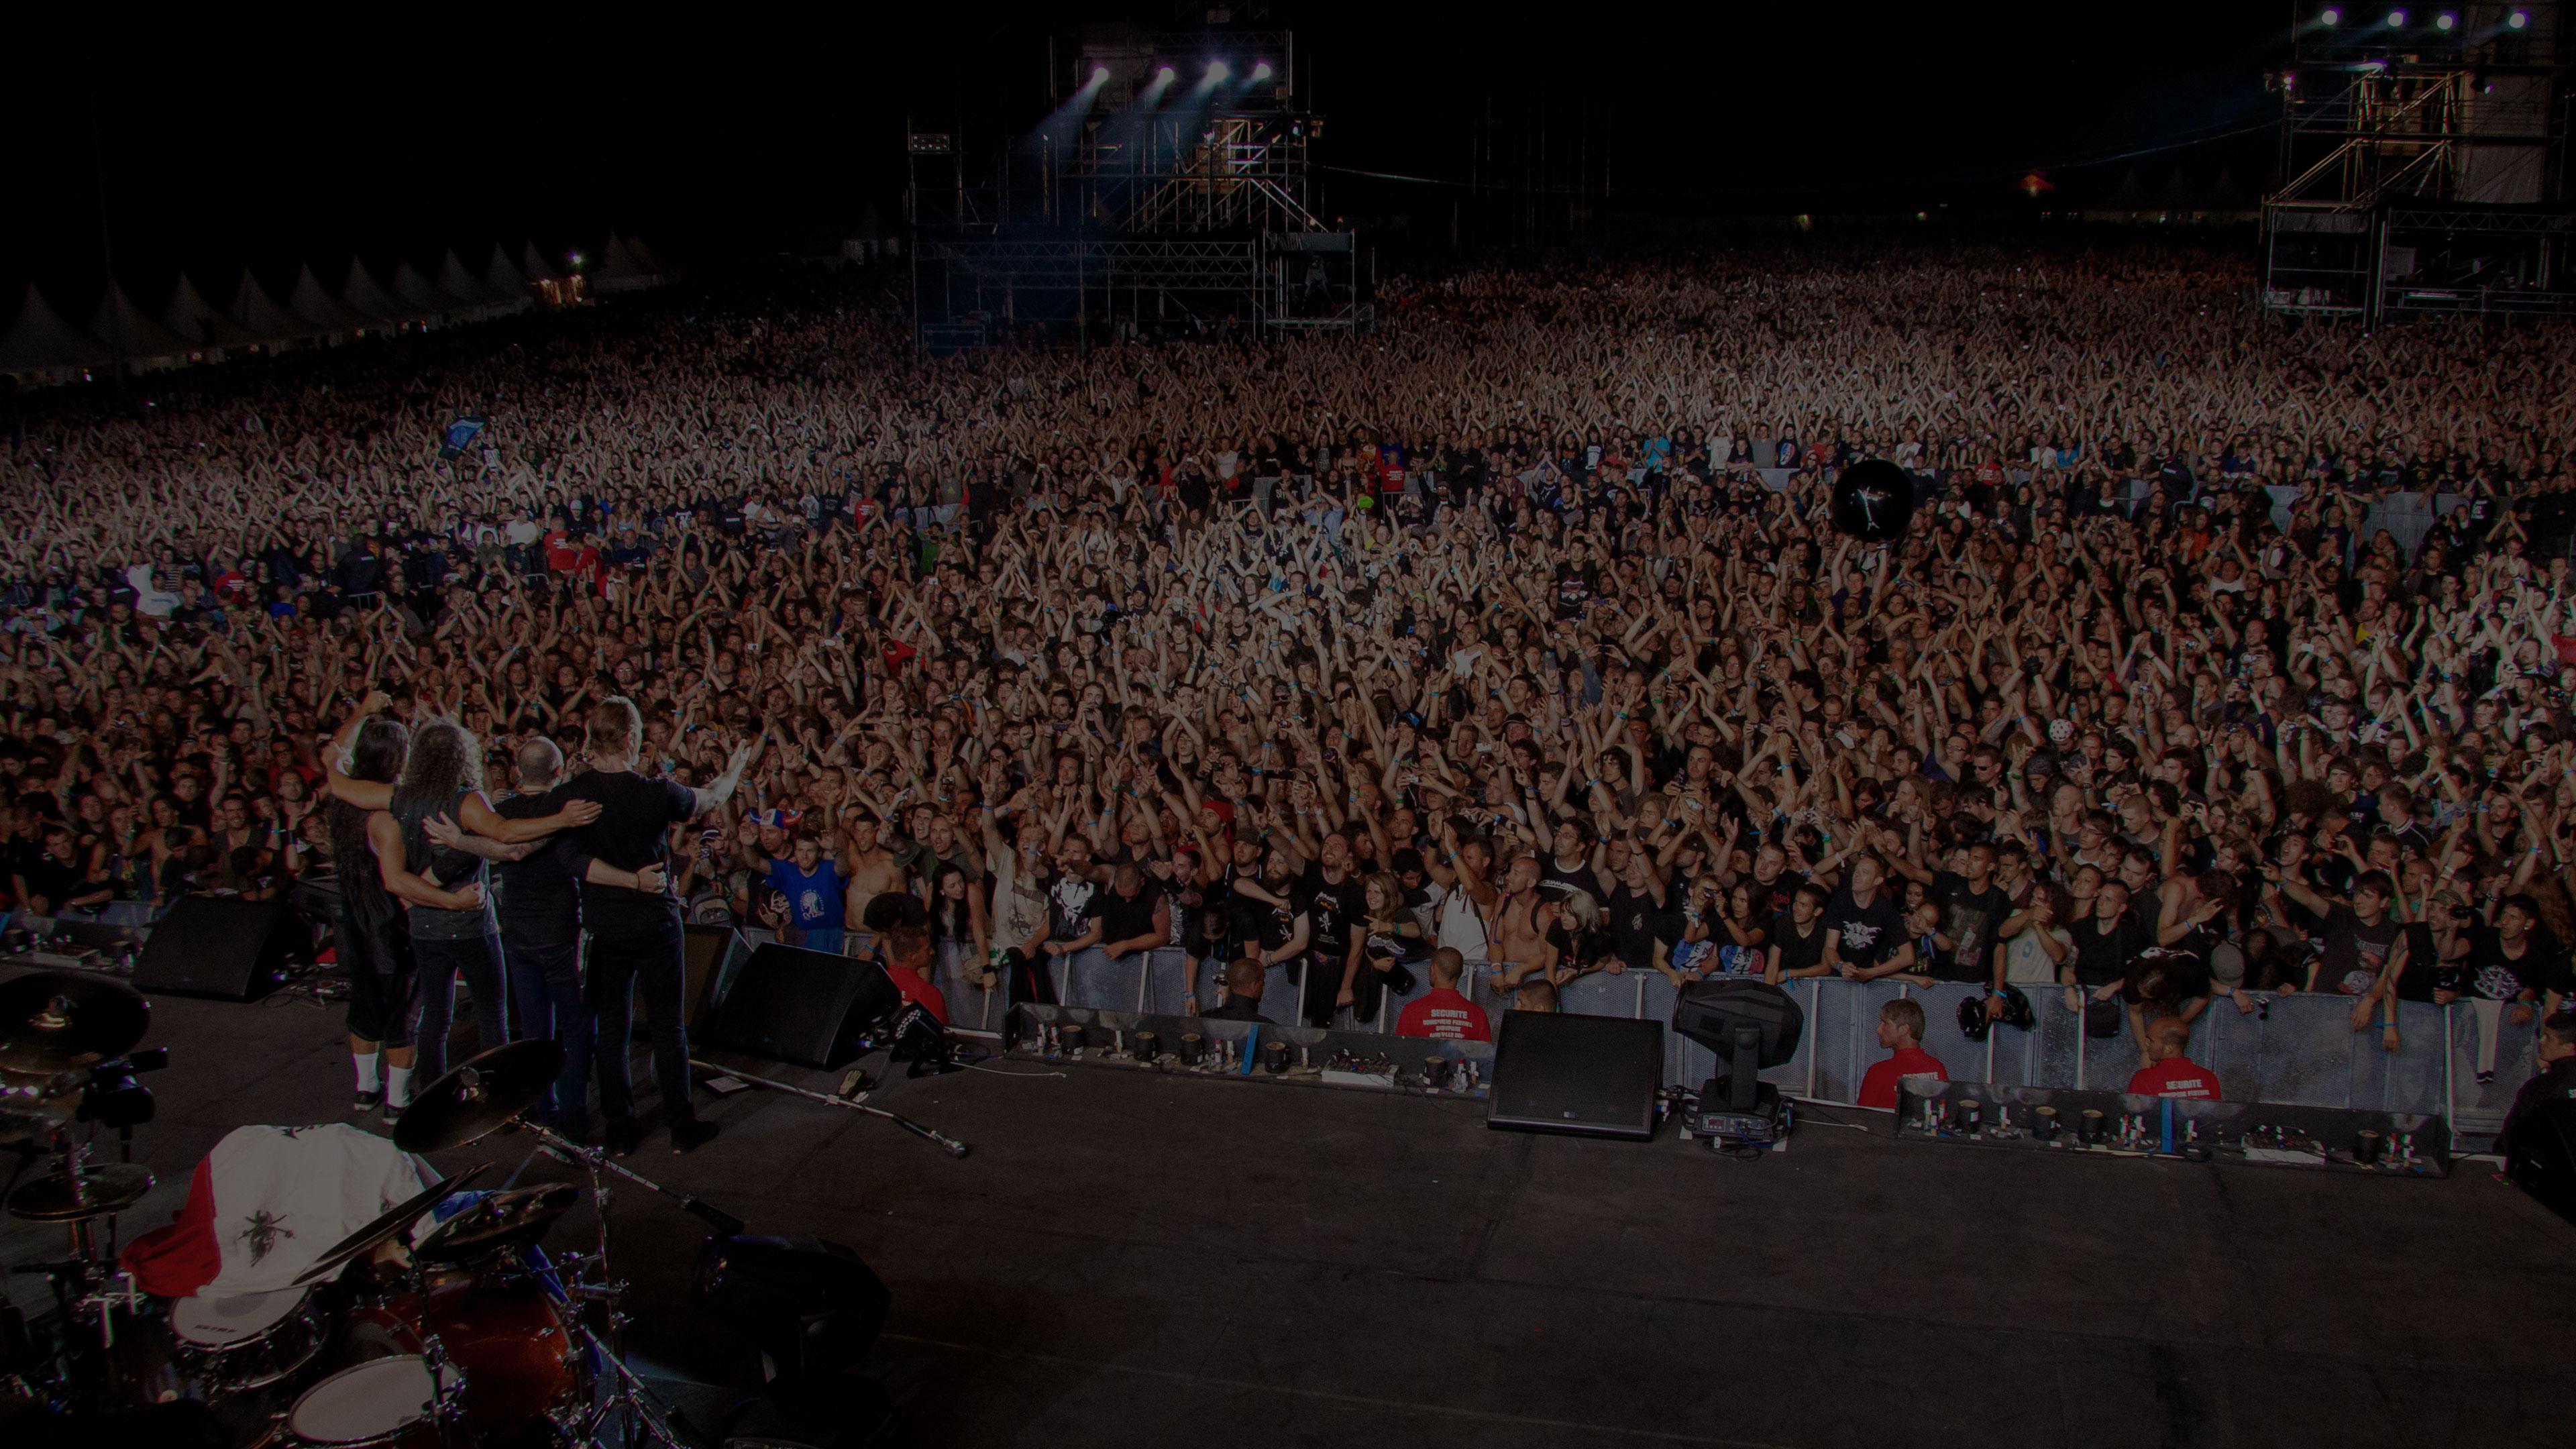 Metallica at Sonisphere at Snowhall Parc in Amnéville, France on July 9, 2011